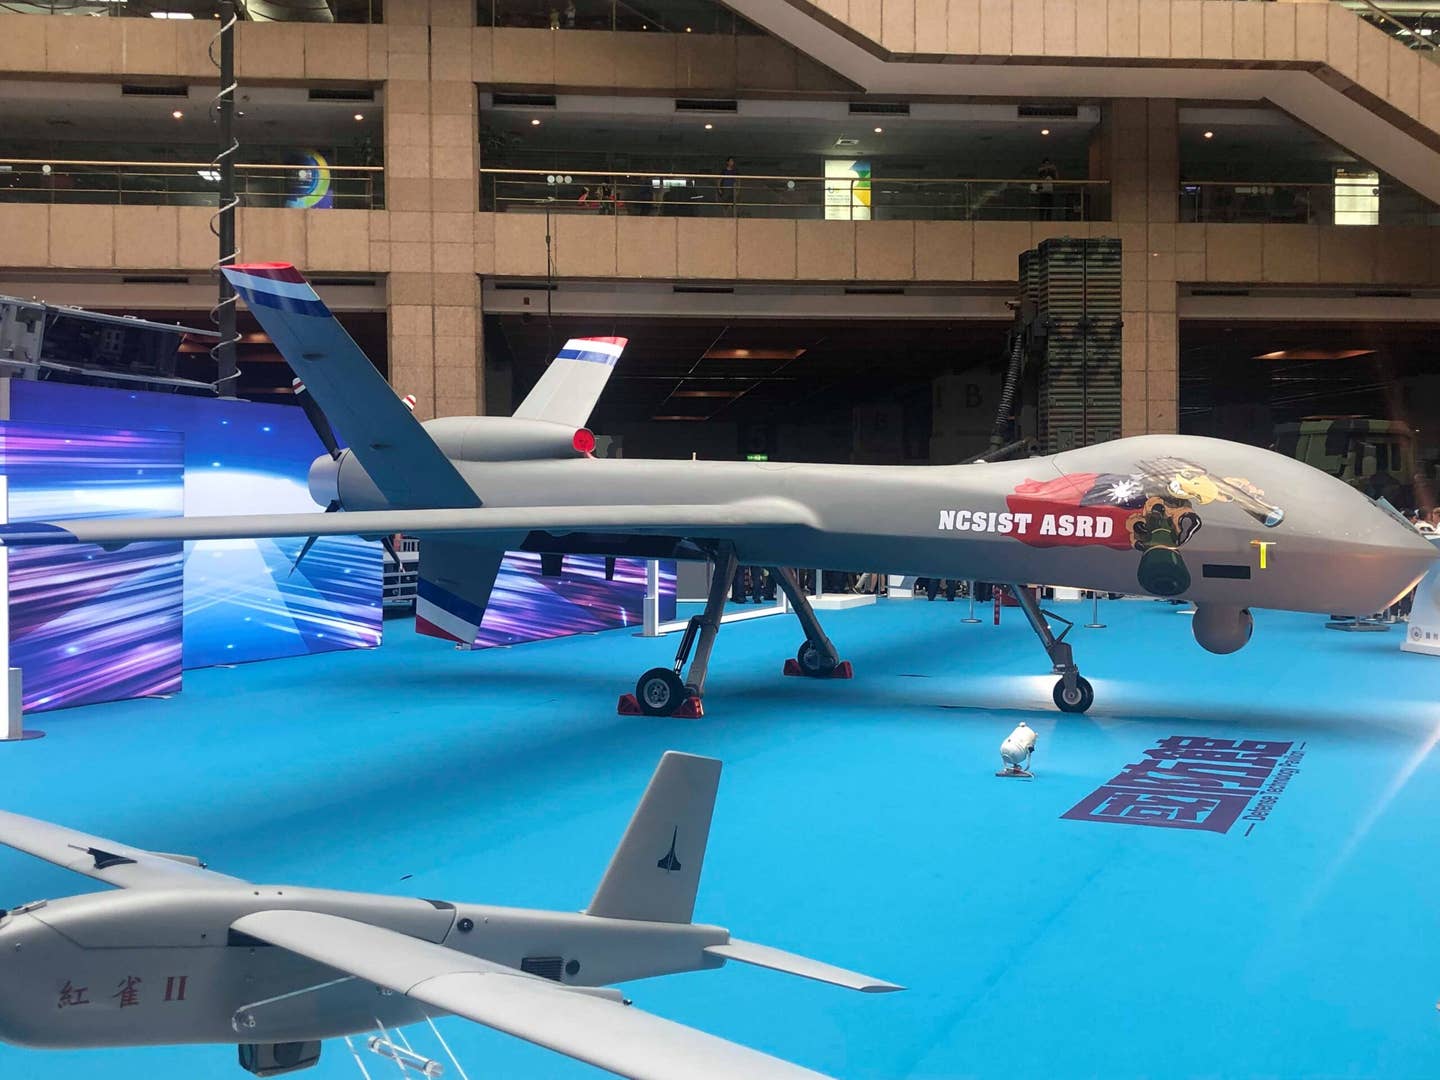 The Teng Yun loitering munition on display at the 2019 Taipei Aerospace &amp; Defense Technology Exhibition. <em>Credit: Kenchen945/Wikimedia Commons</em>